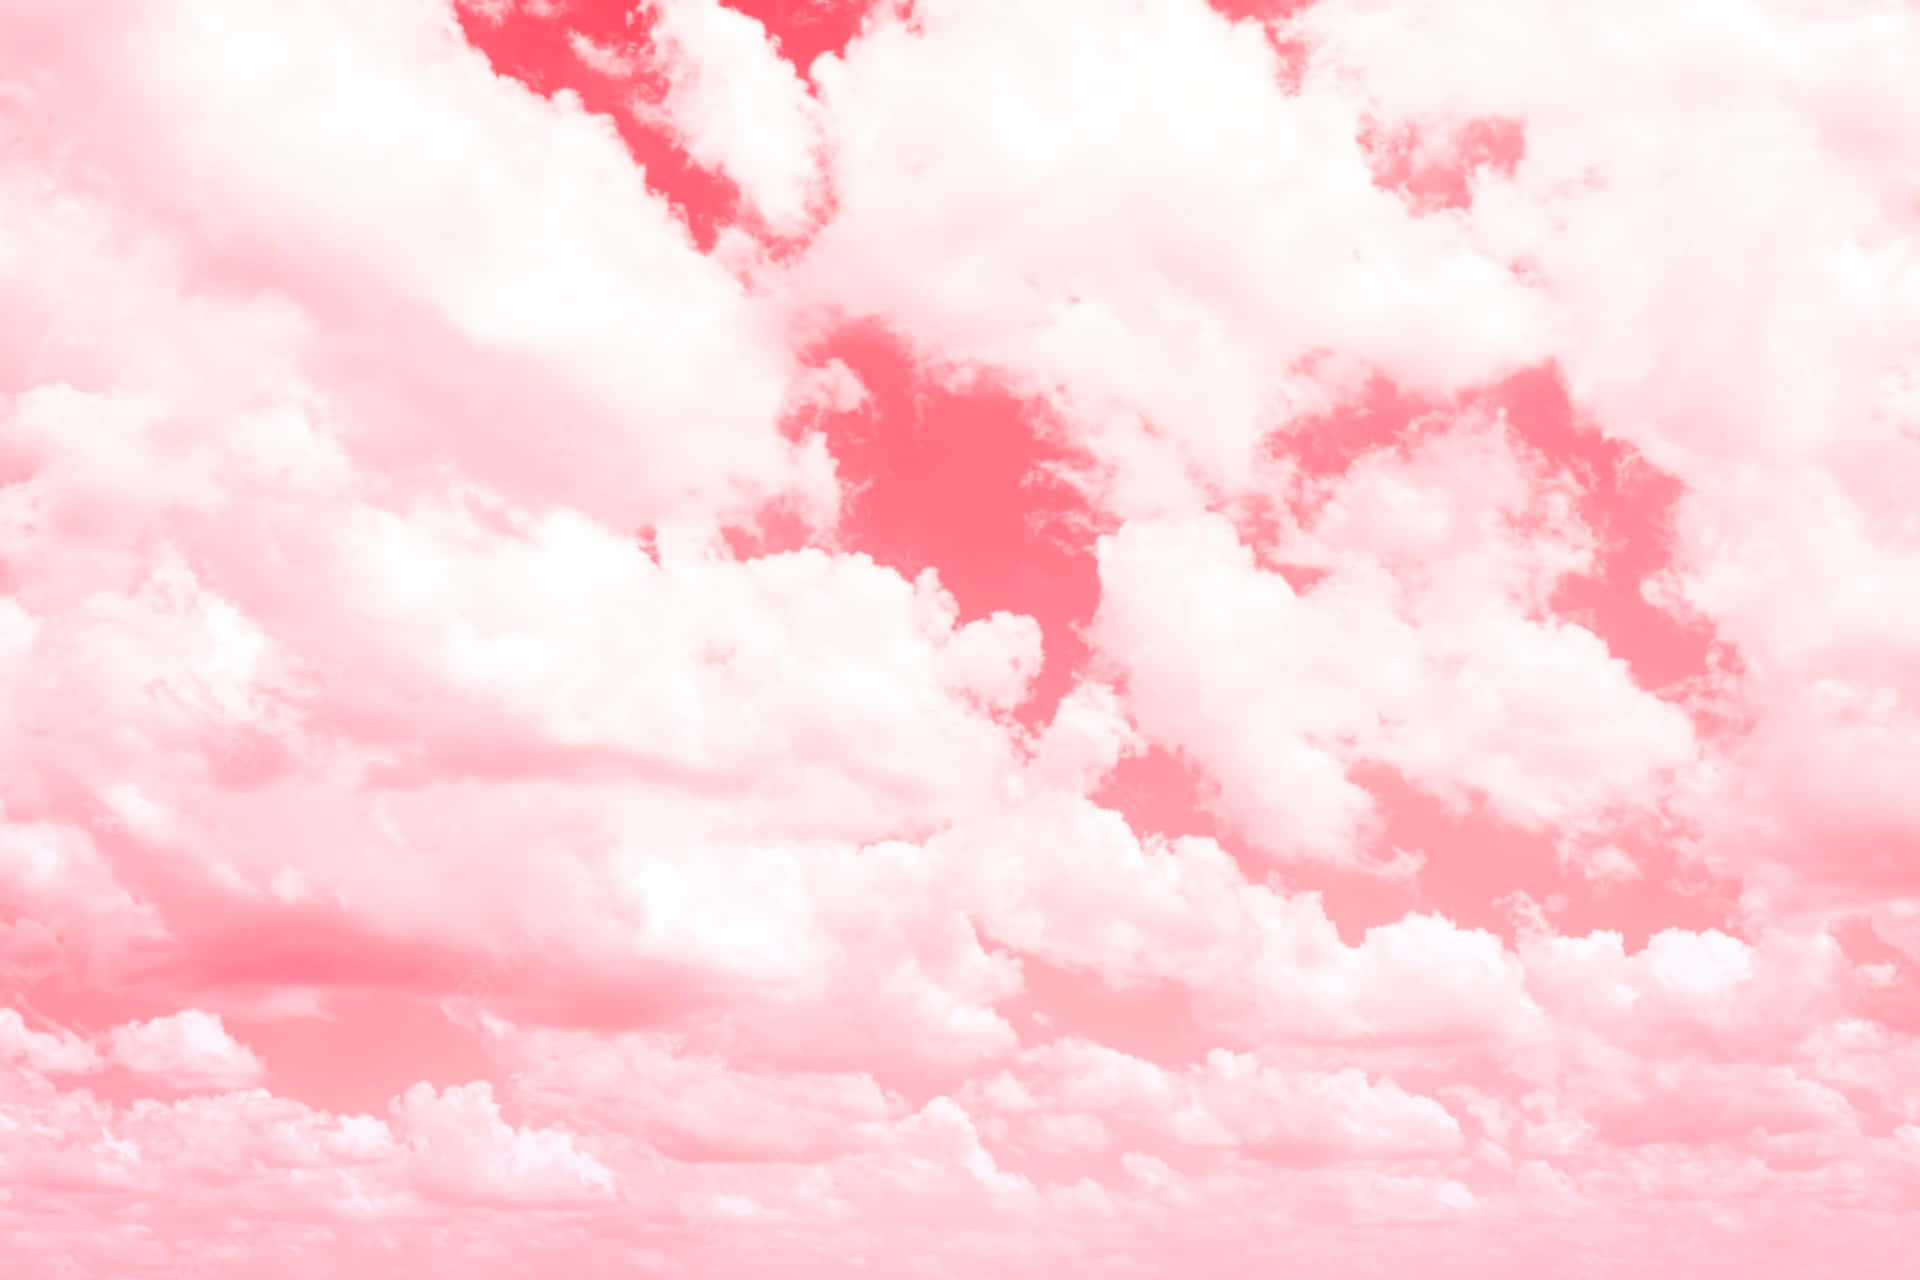 Themes of Beauty and Adventure Abound in this Unusual Pink and Blue Cloudscape Wallpaper